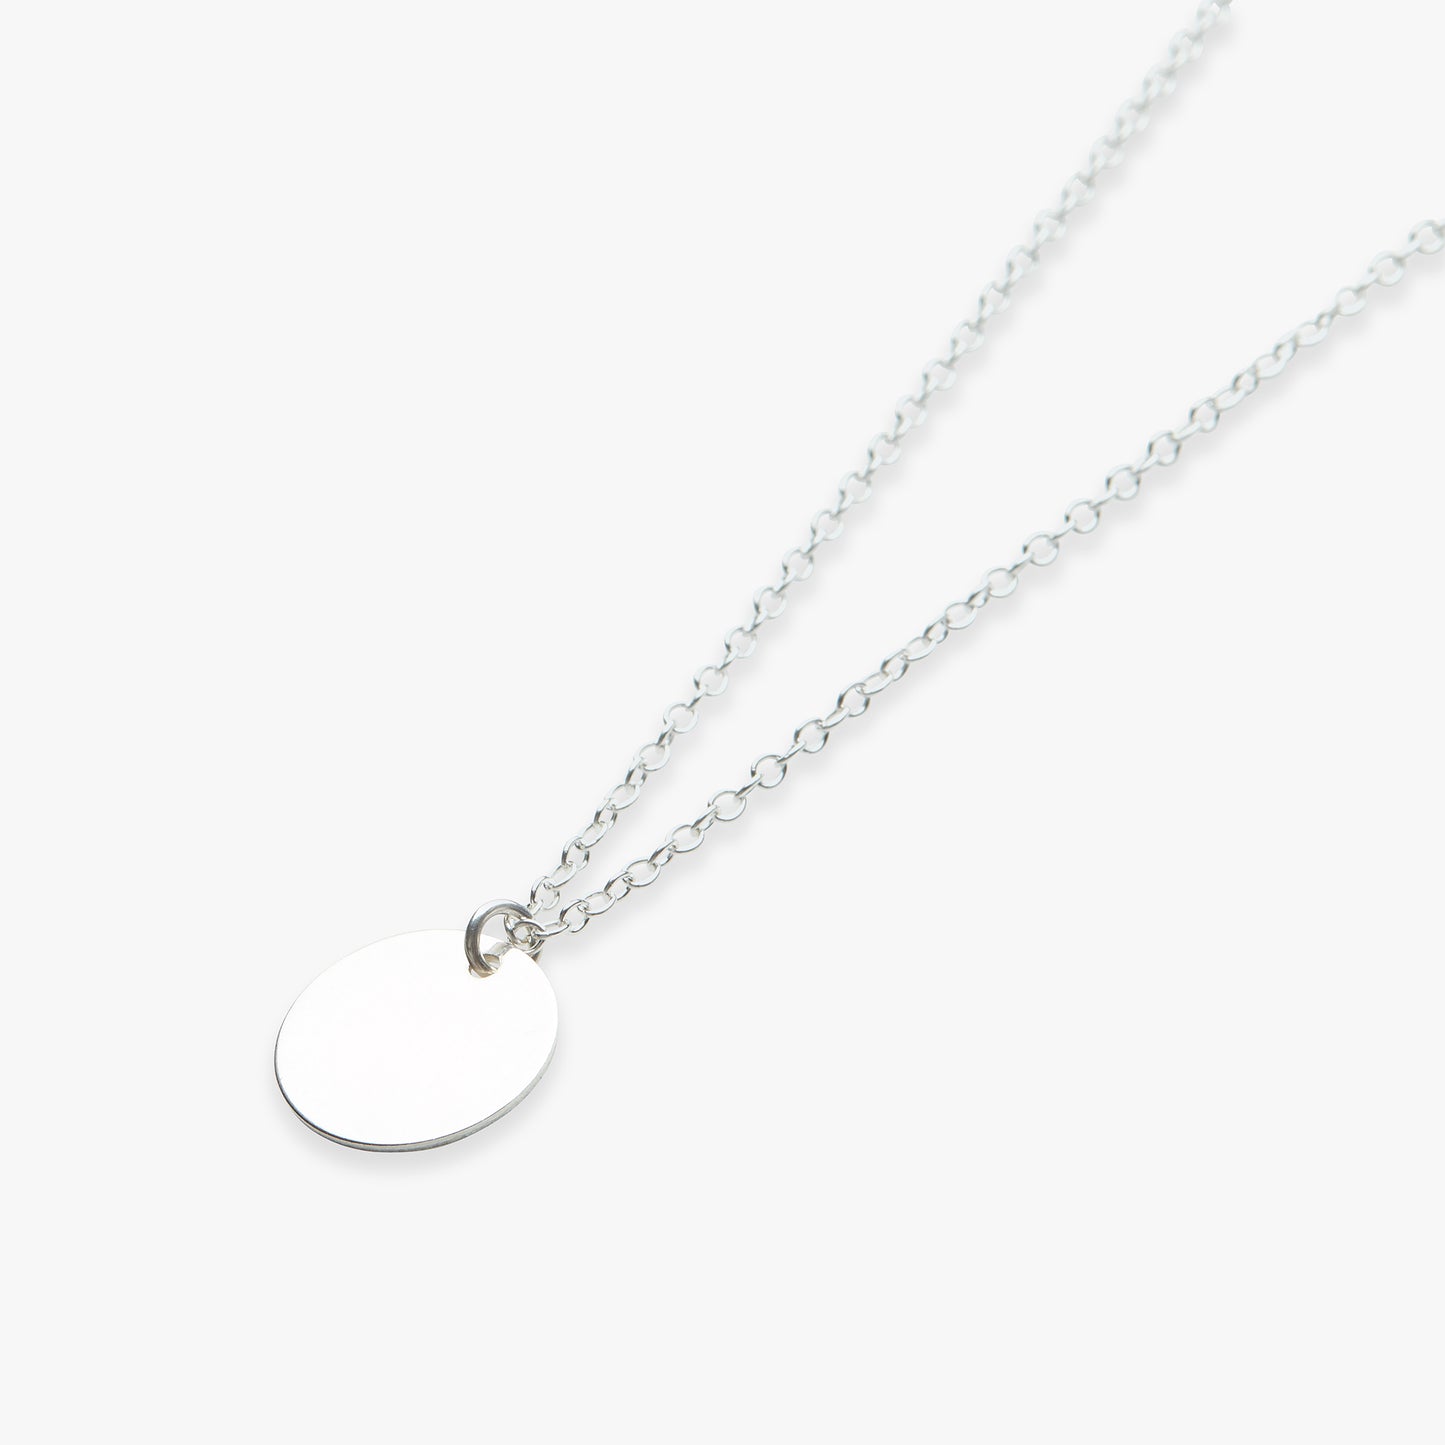 Big coin ketting zilver